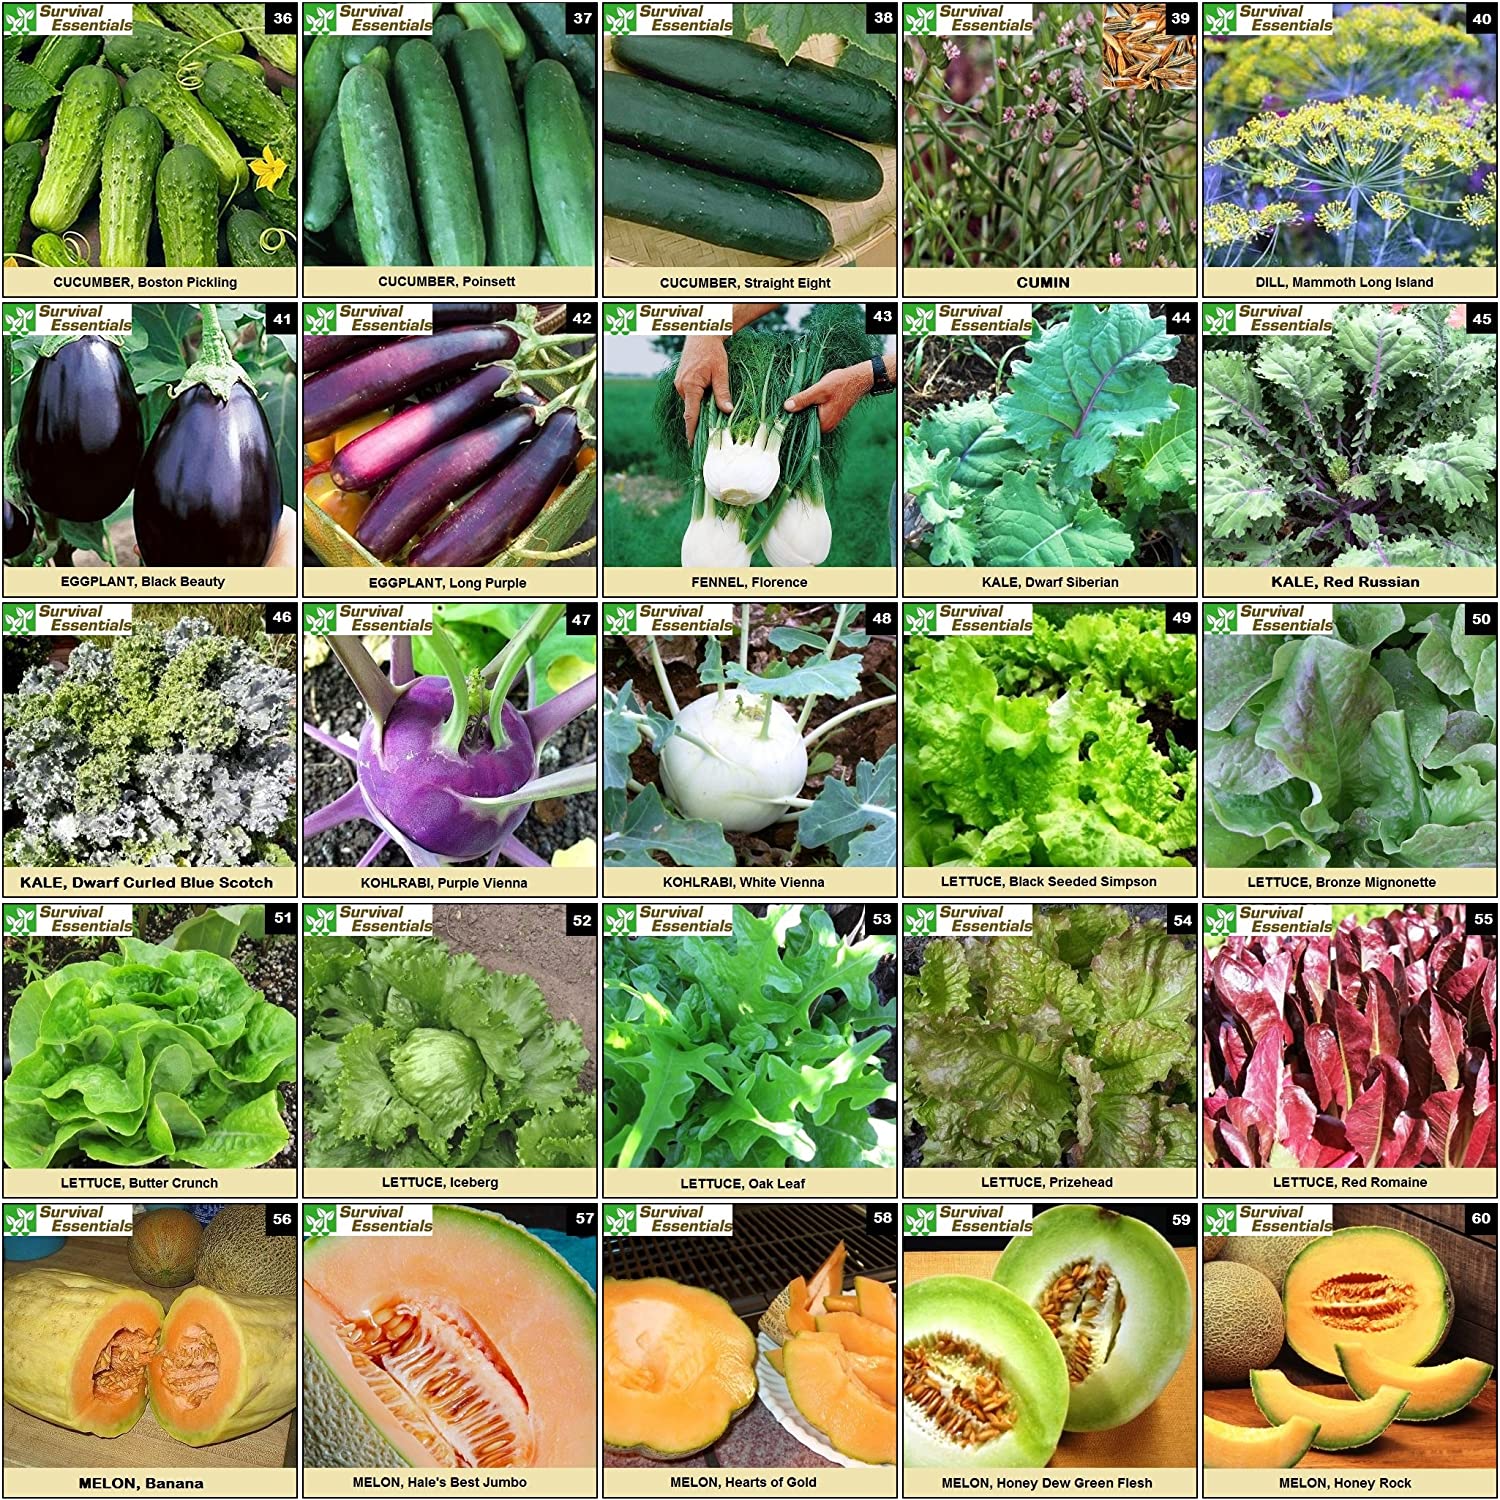 Image displaying a variety of vegetables arranged alphabetically from C to M, showcasing a diverse selection of produce